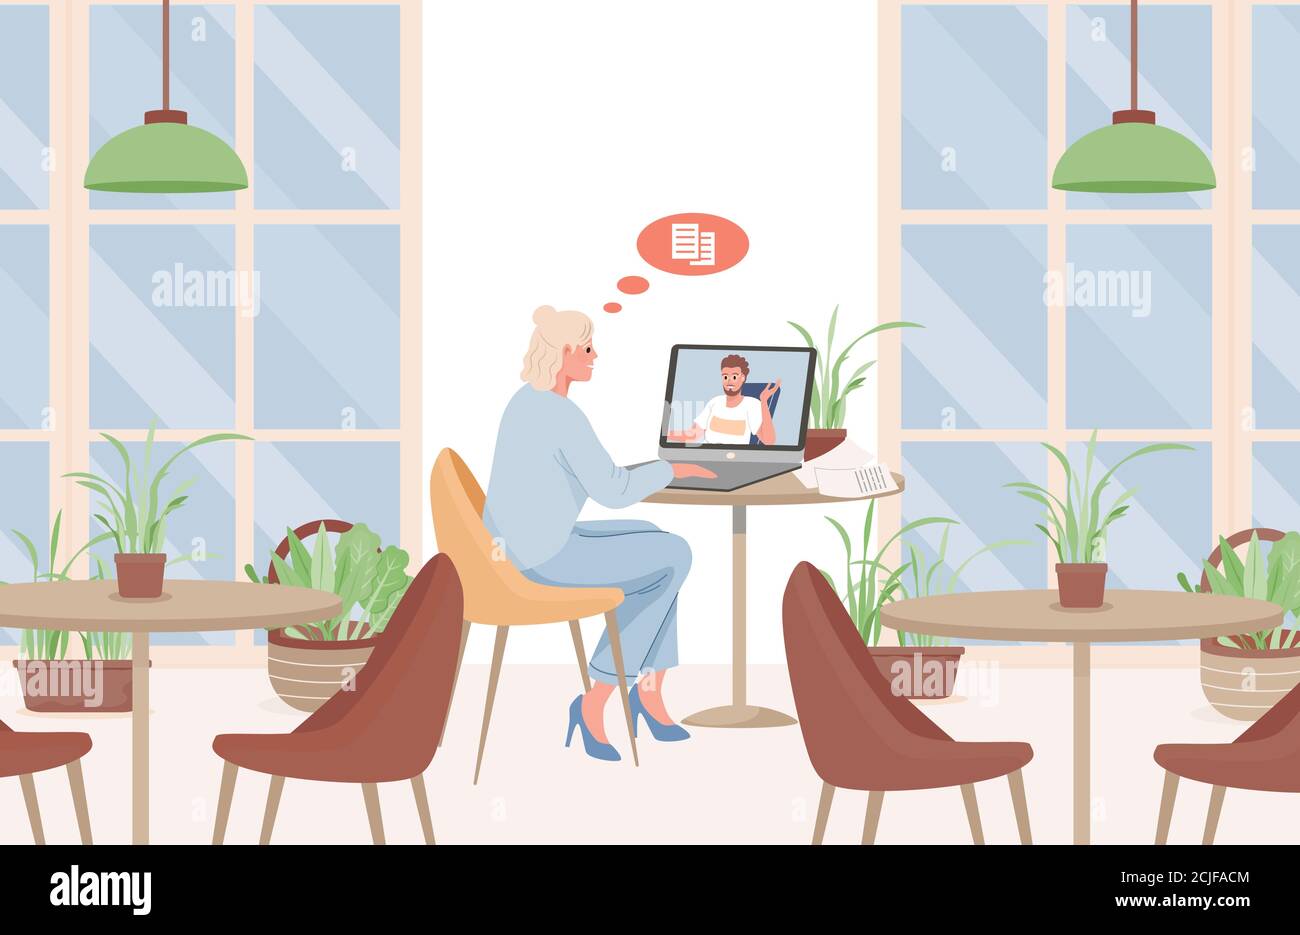 Young woman sitting in cafe or restaurant and speaking with man via videoconference vector flat illustration. Video call. Man and woman communicating, internet business conversation. Stock Vector